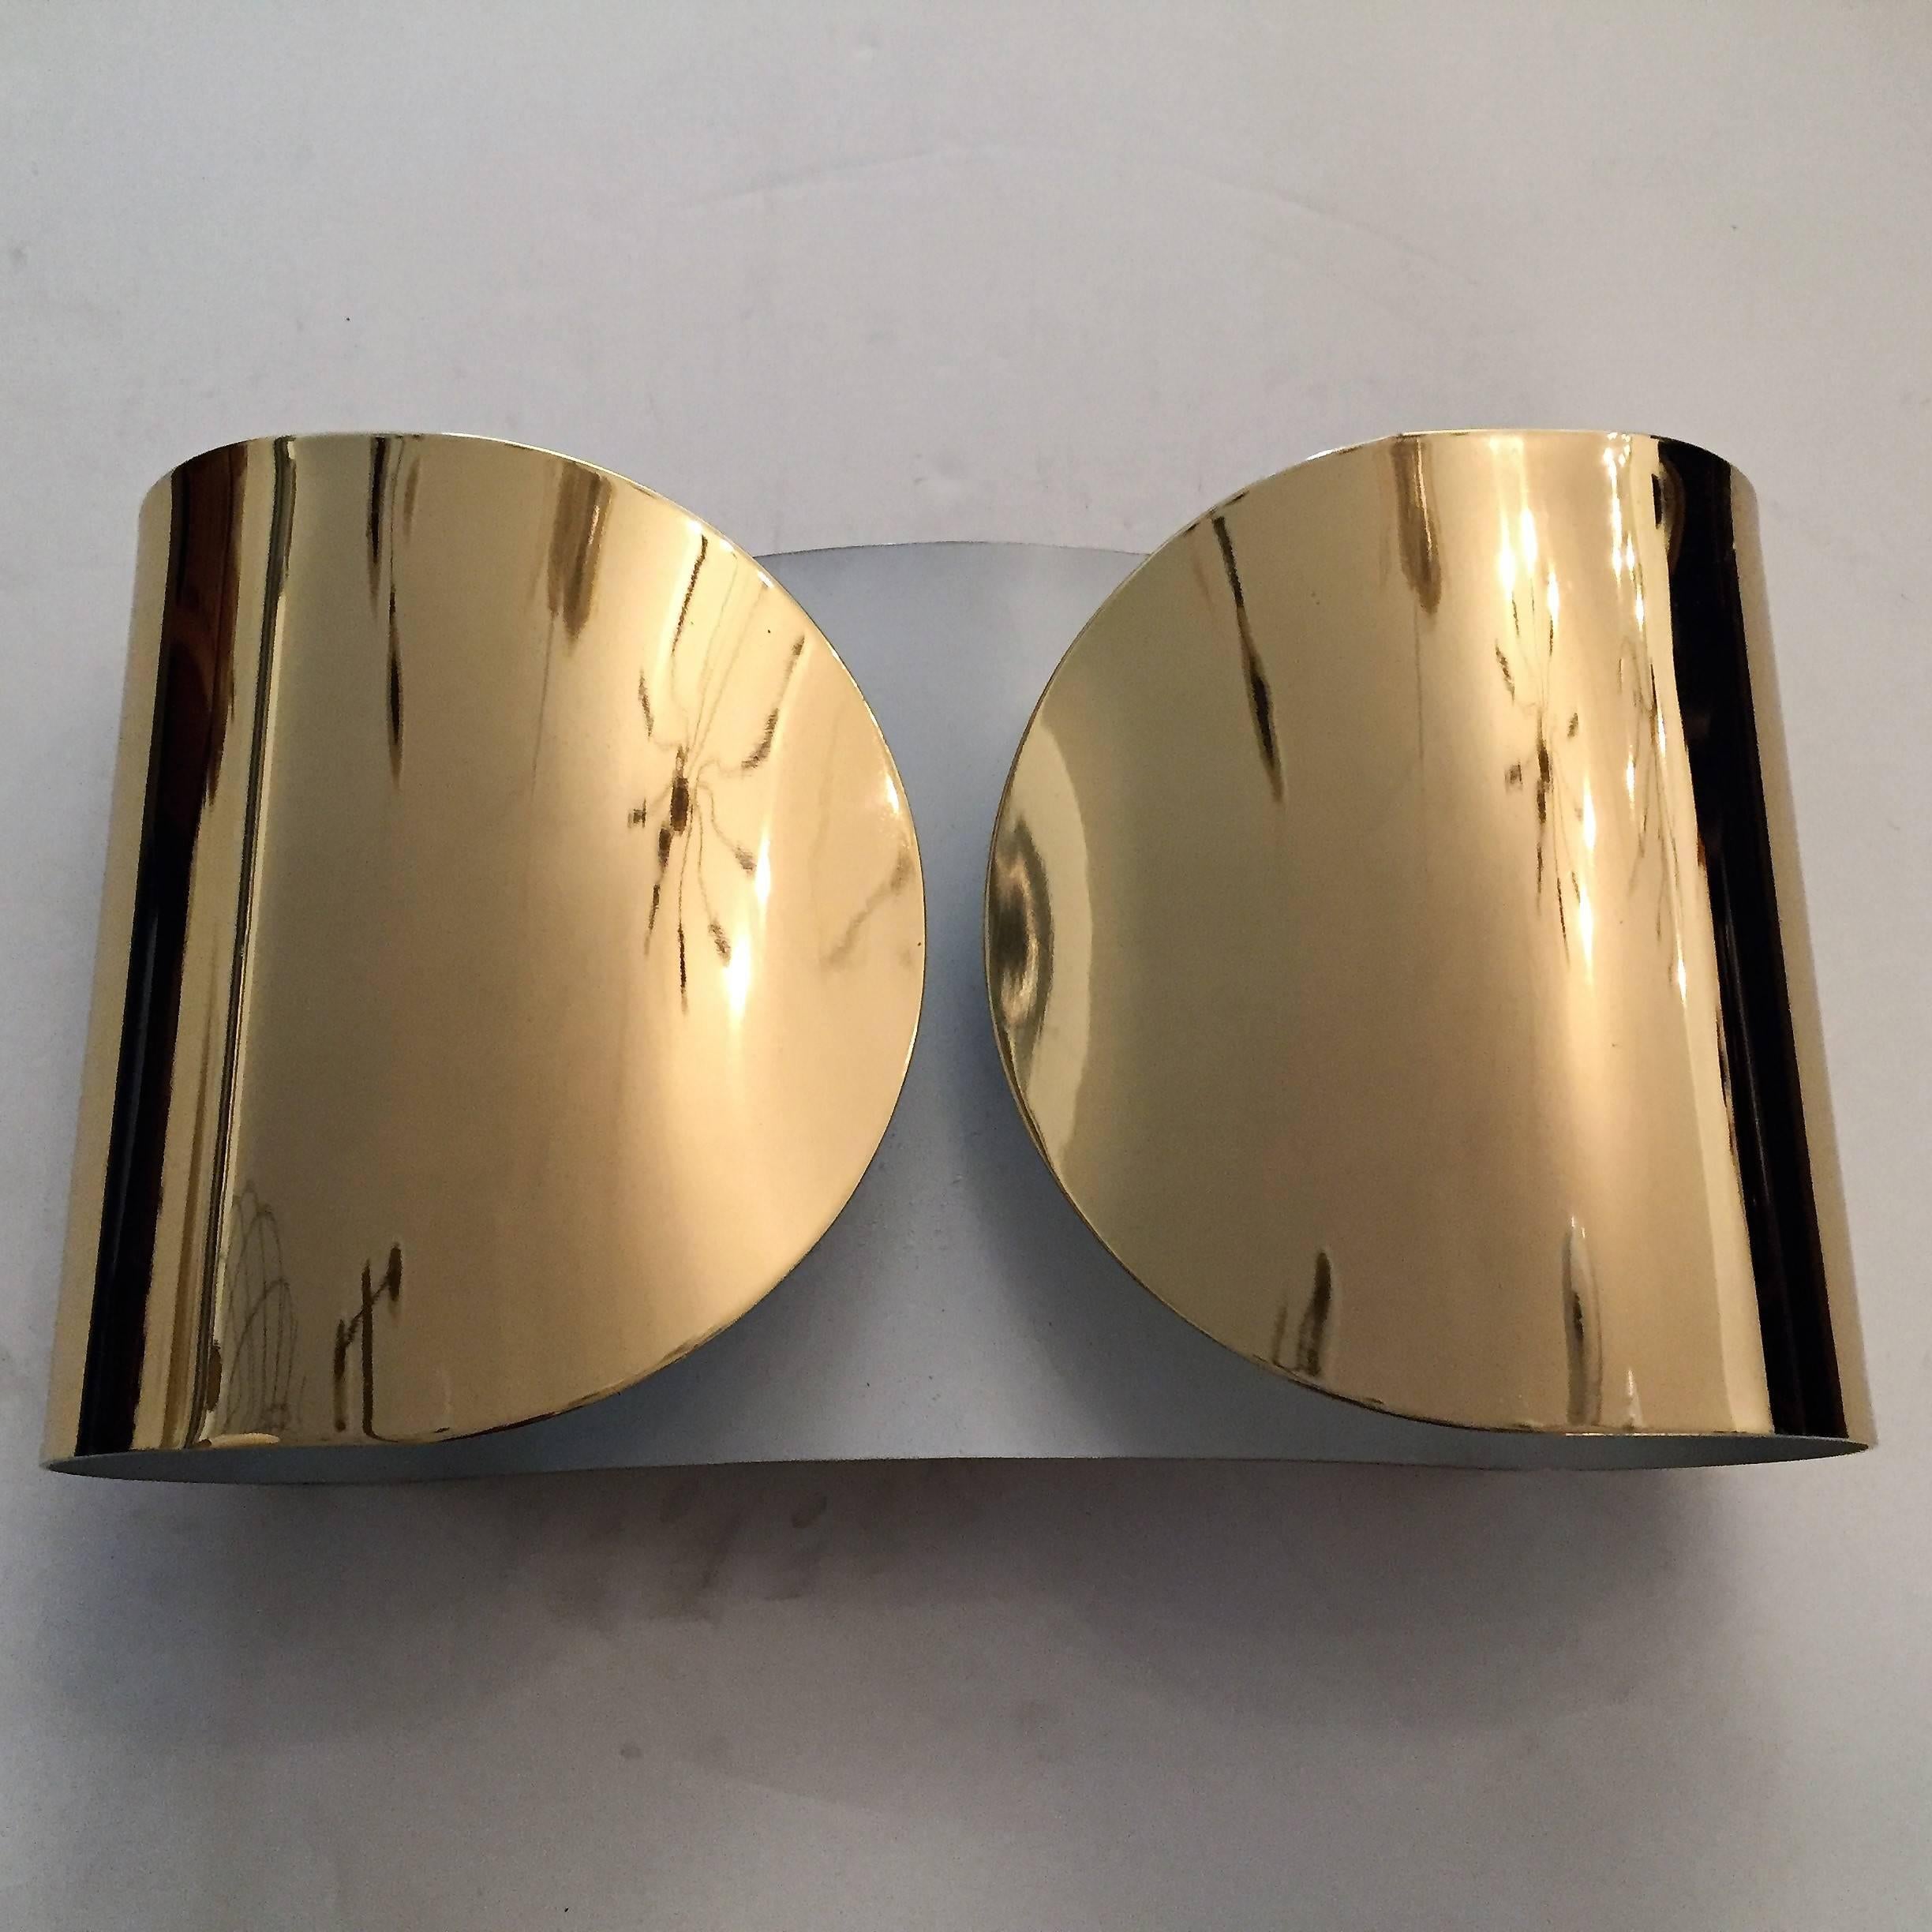 A great pair of oversized polished mirror brass and white enamel sconces by Tobia Scarpa for Flos, circa 1960. Two light sources. Rewired.